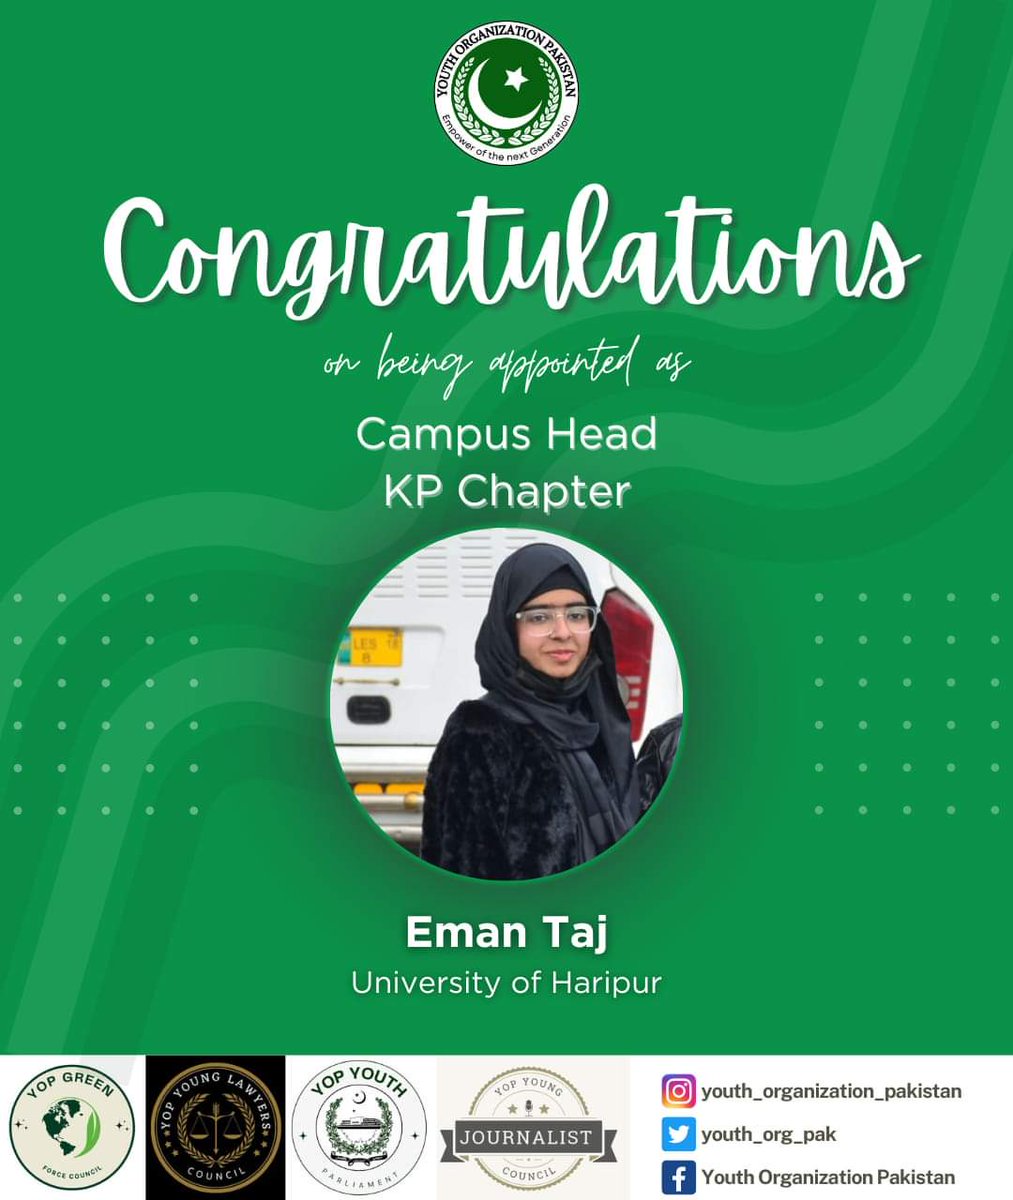 Congratulations Eman Taj  on being appointed as Campus head university of Haripur YOP KP chapter 
#YOP #KP #youngleaders #youthempowerment #welcome #Congratulations